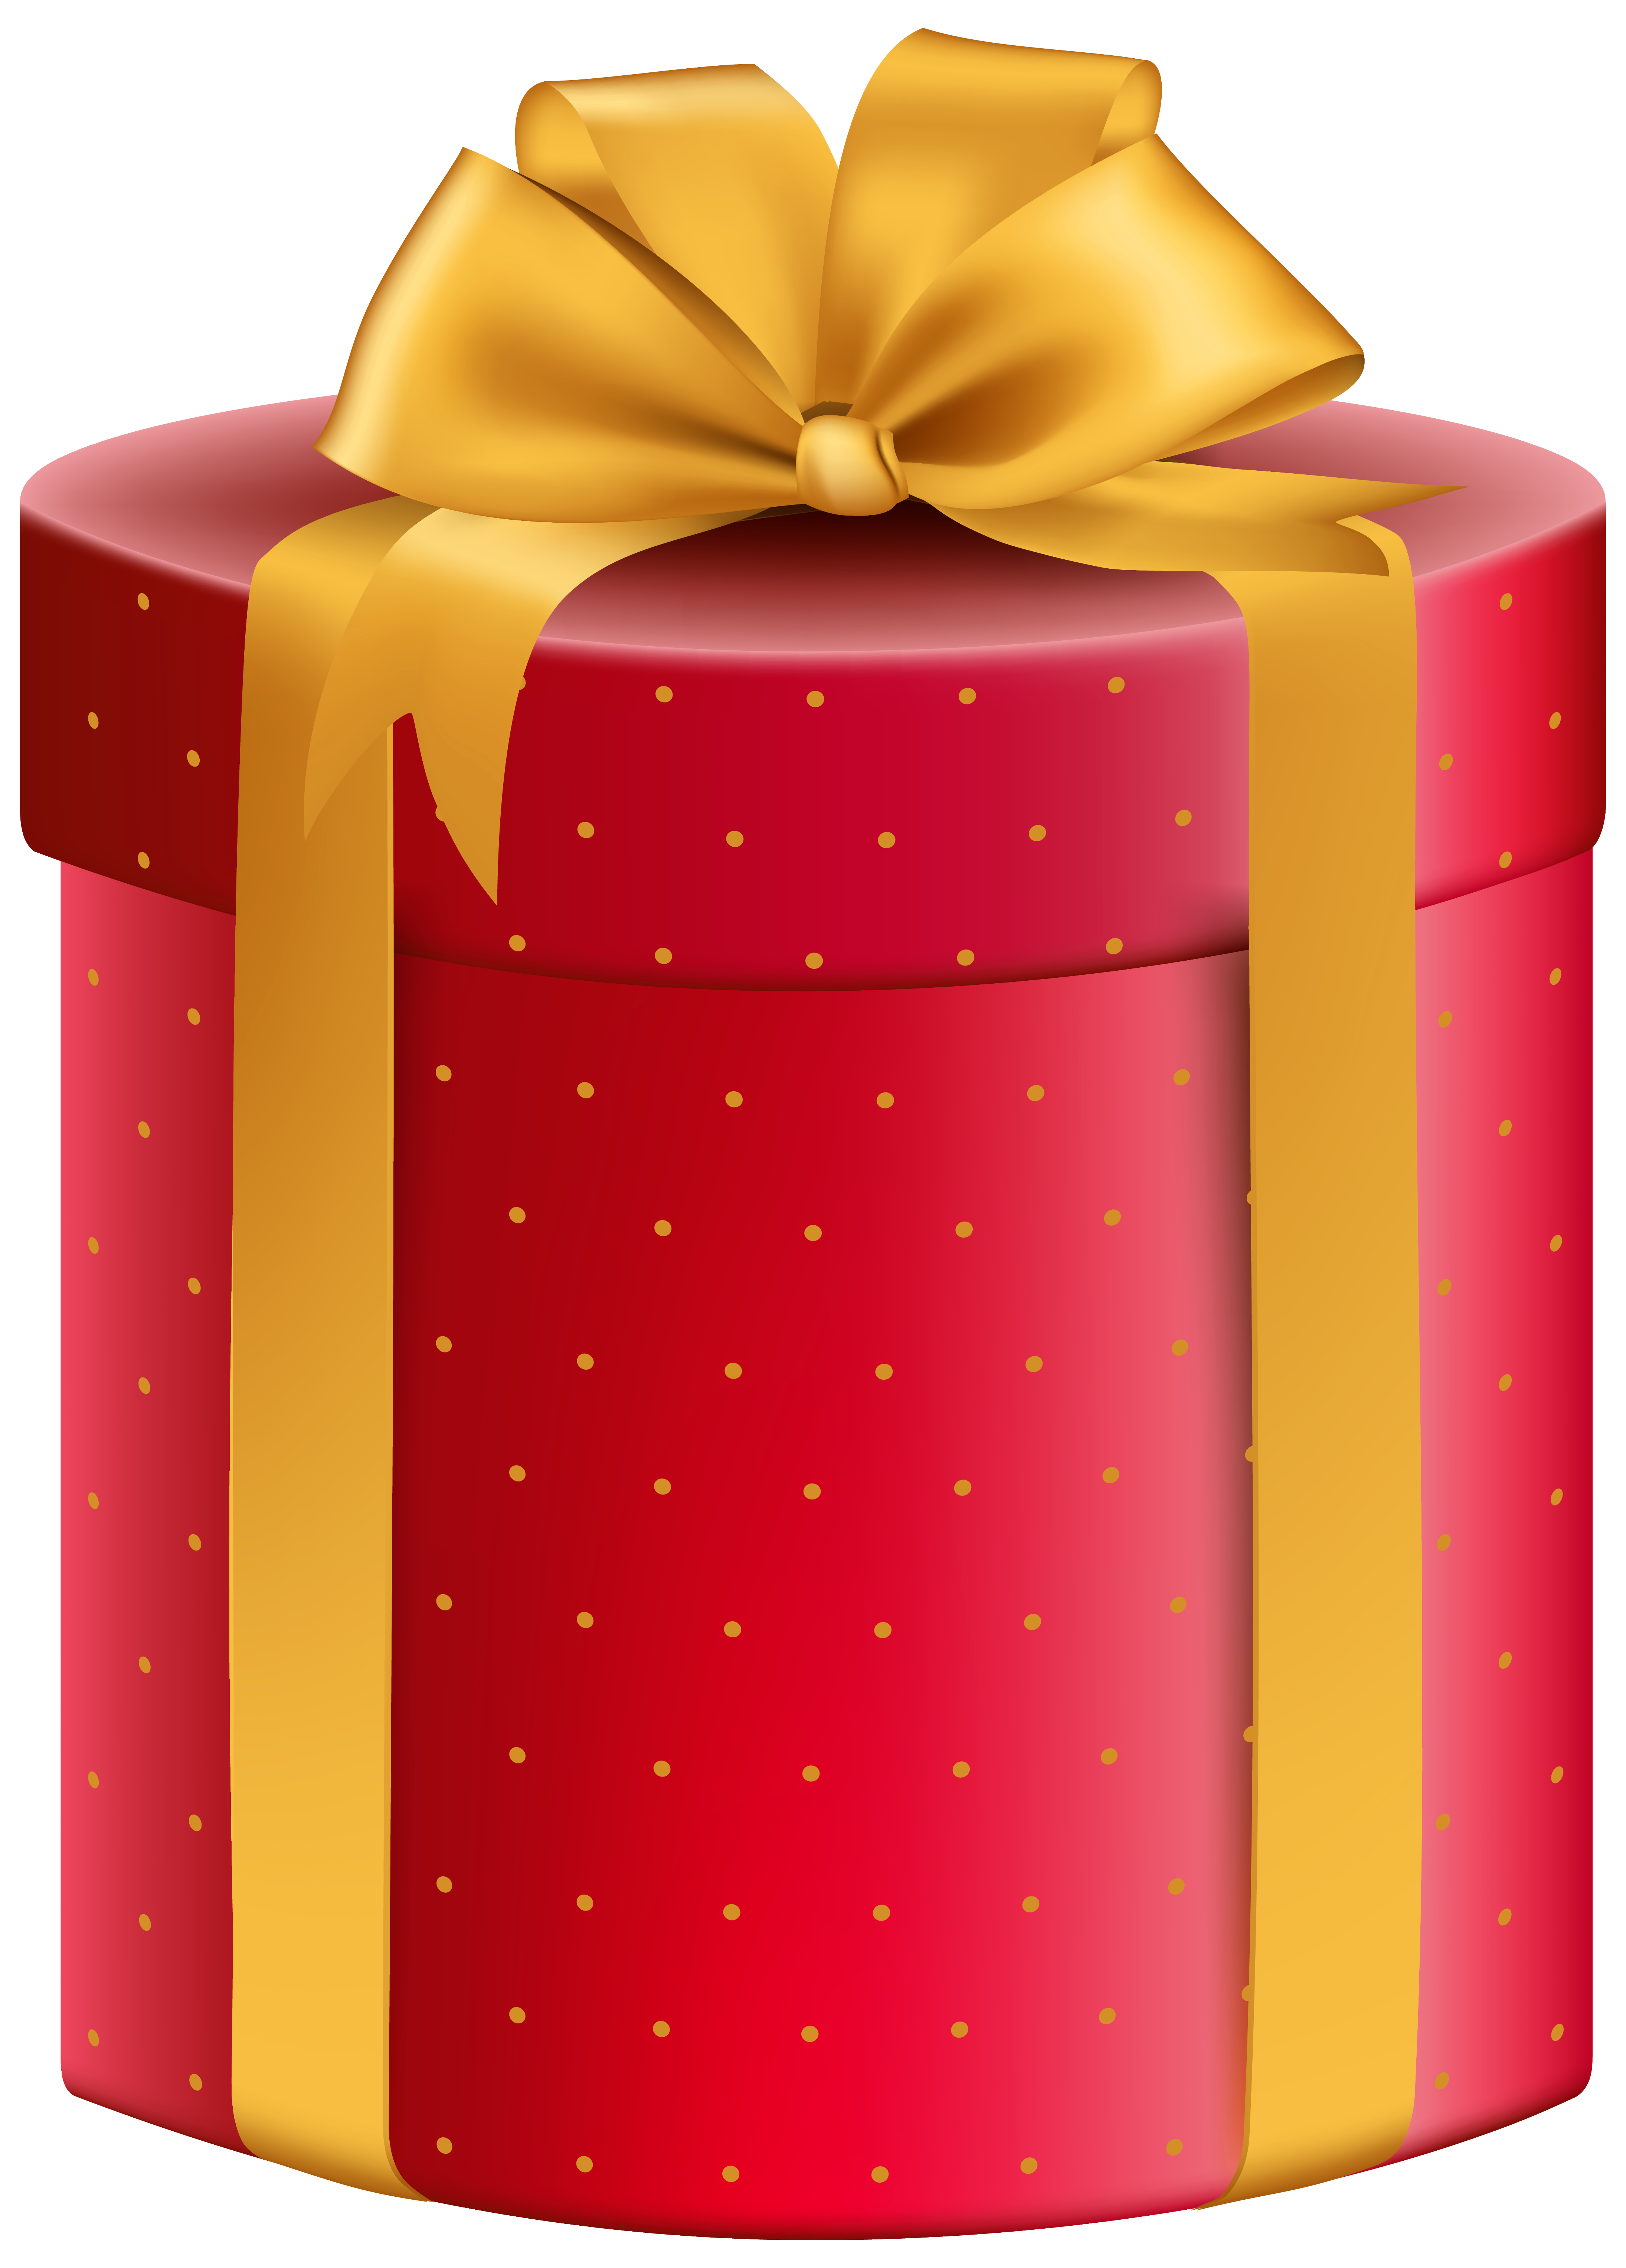 gifts clipart yellow